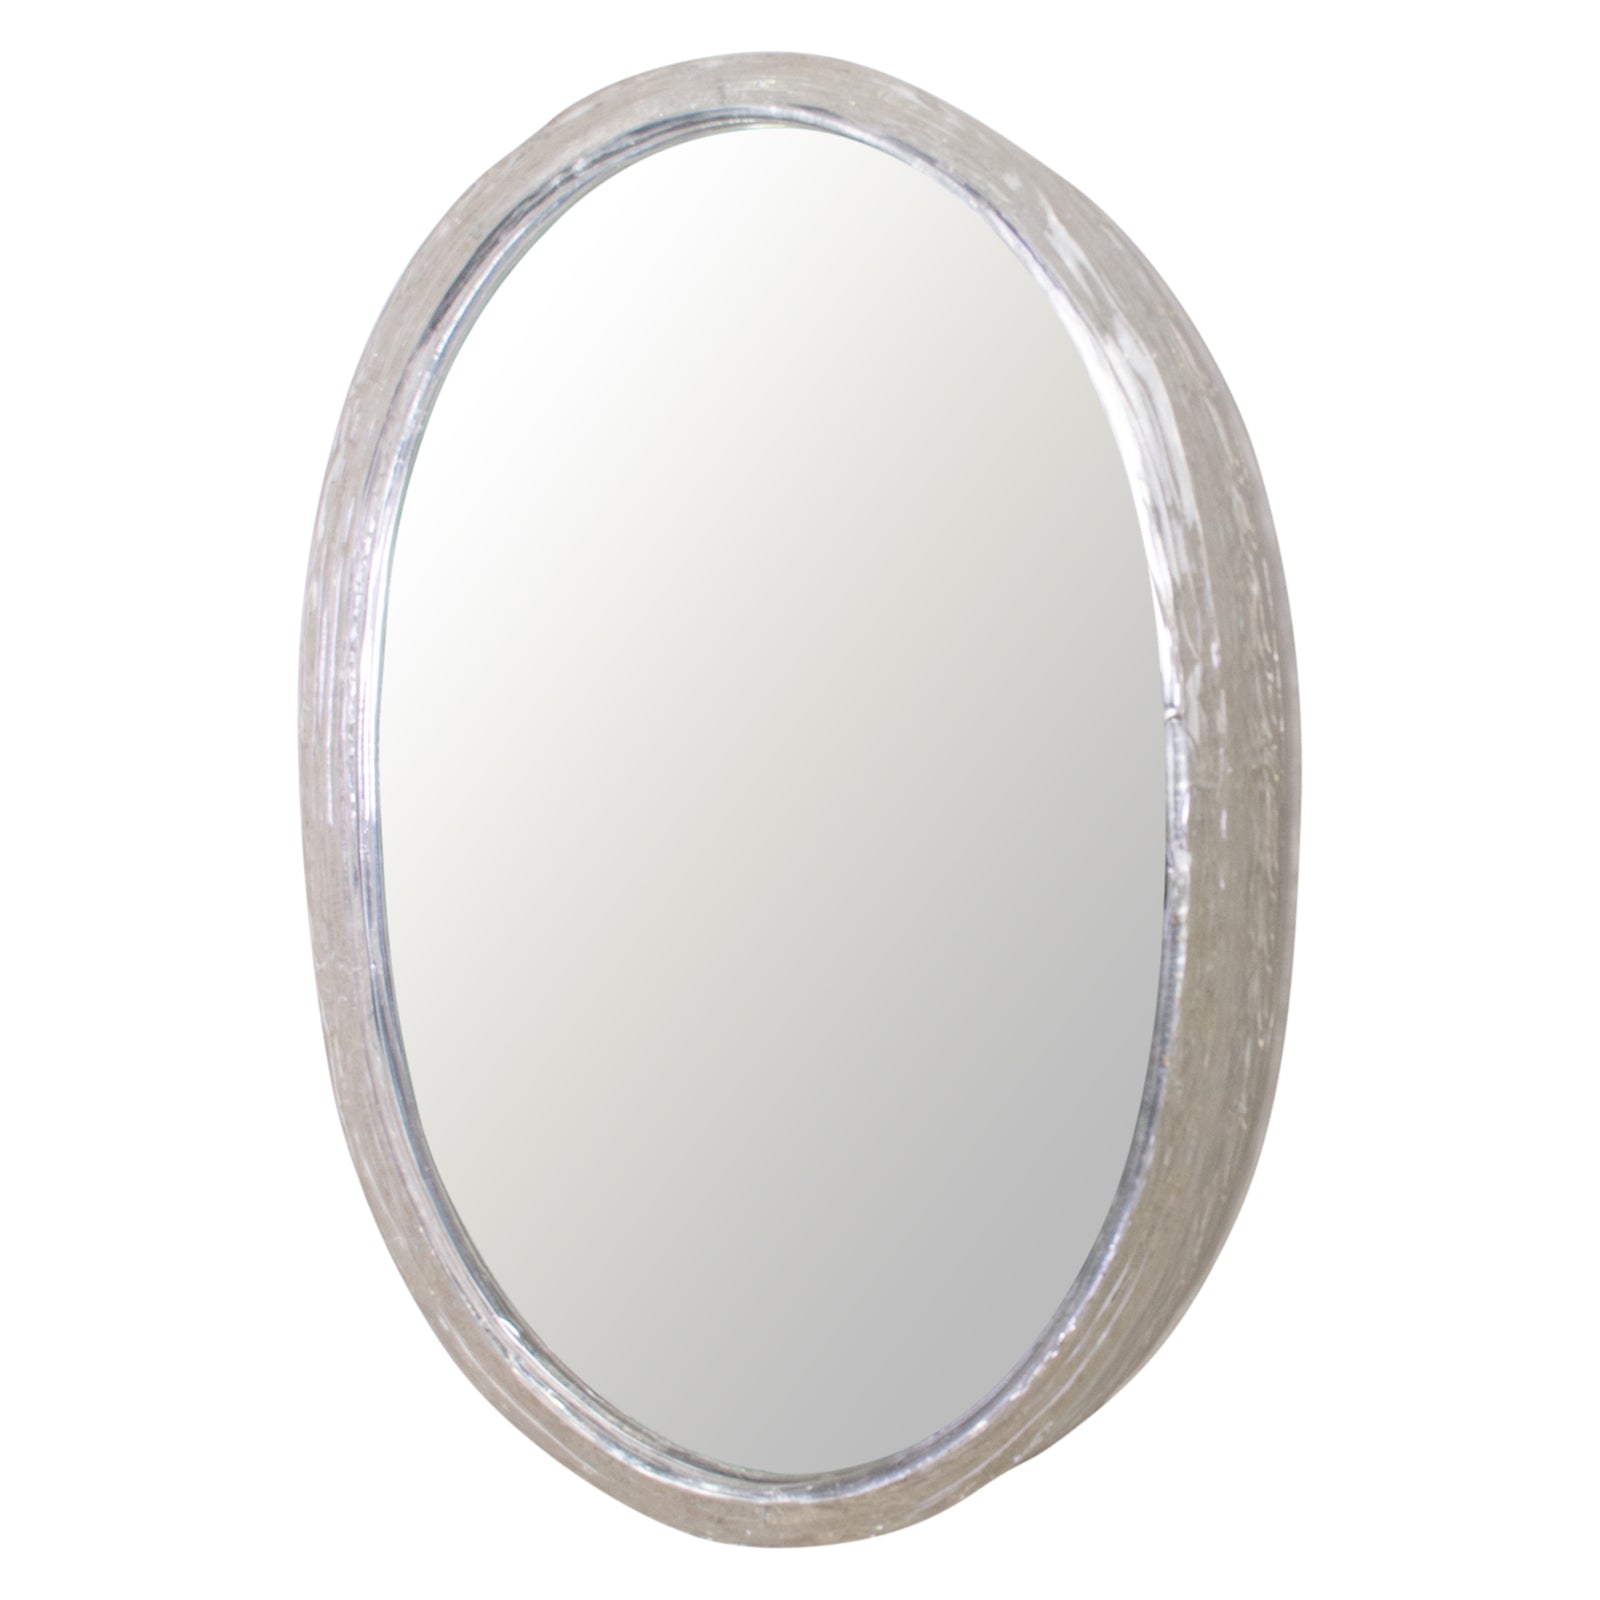 Illuminated Lucite Mirror by Erco